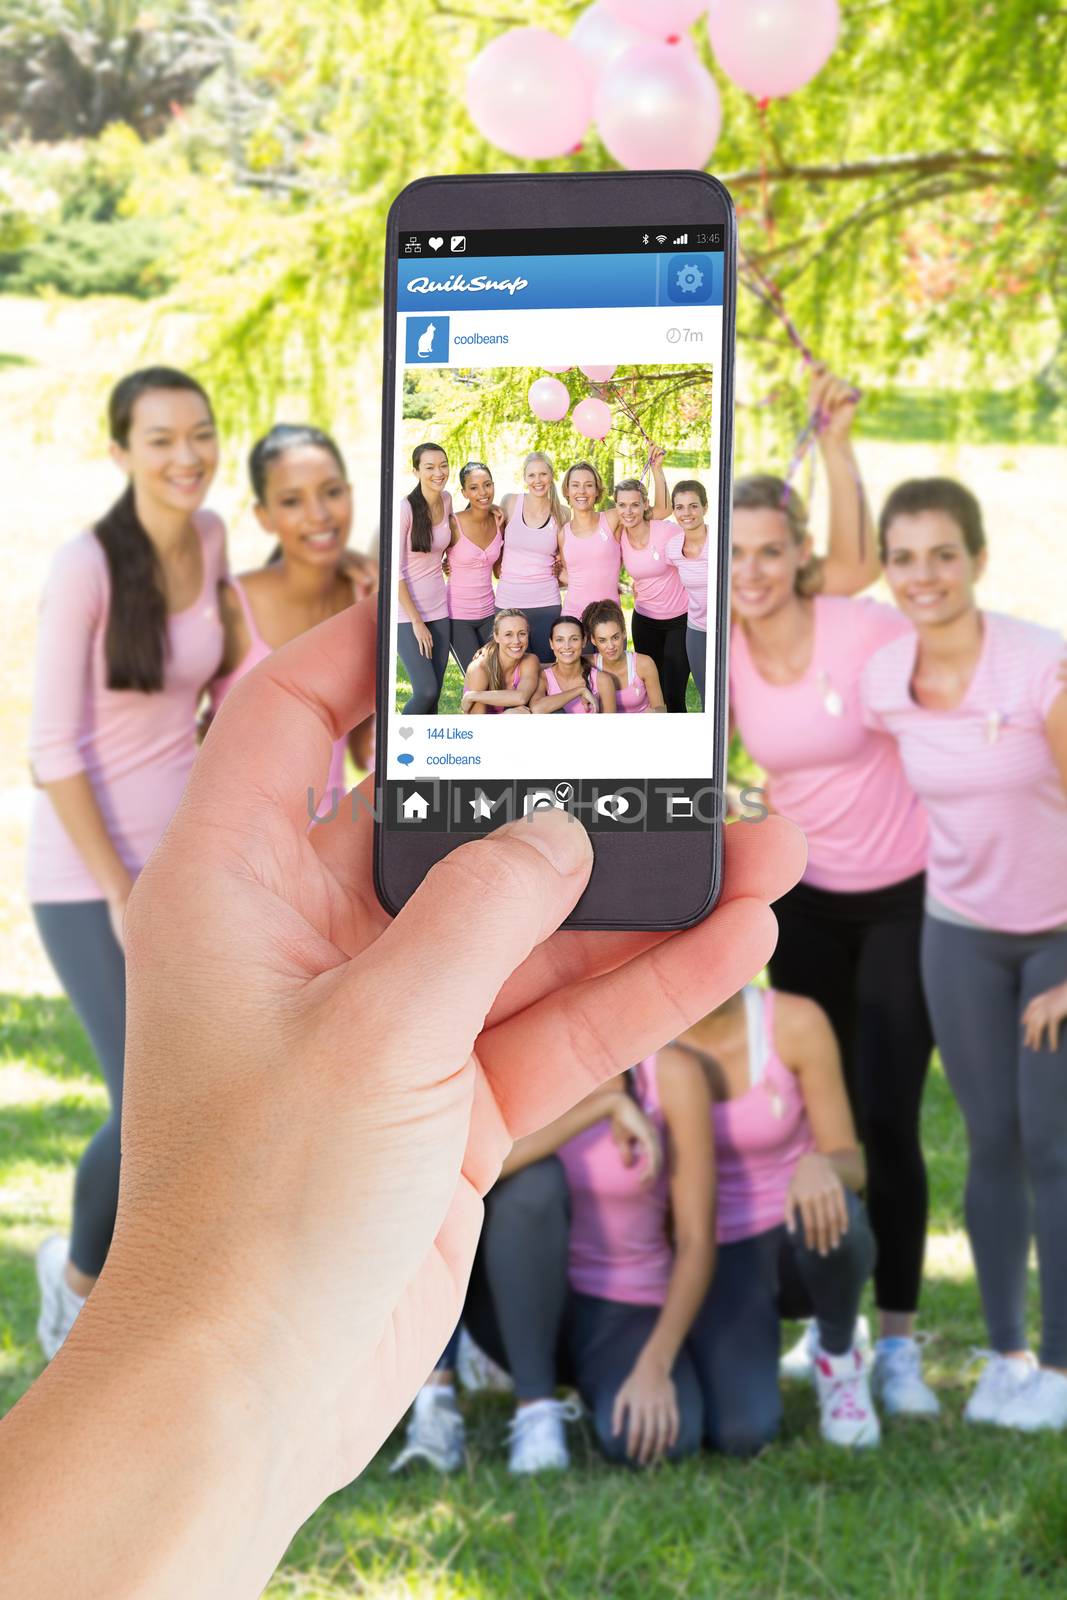 Female hand holding a smartphone against smiling women in pink for breast cancer awareness